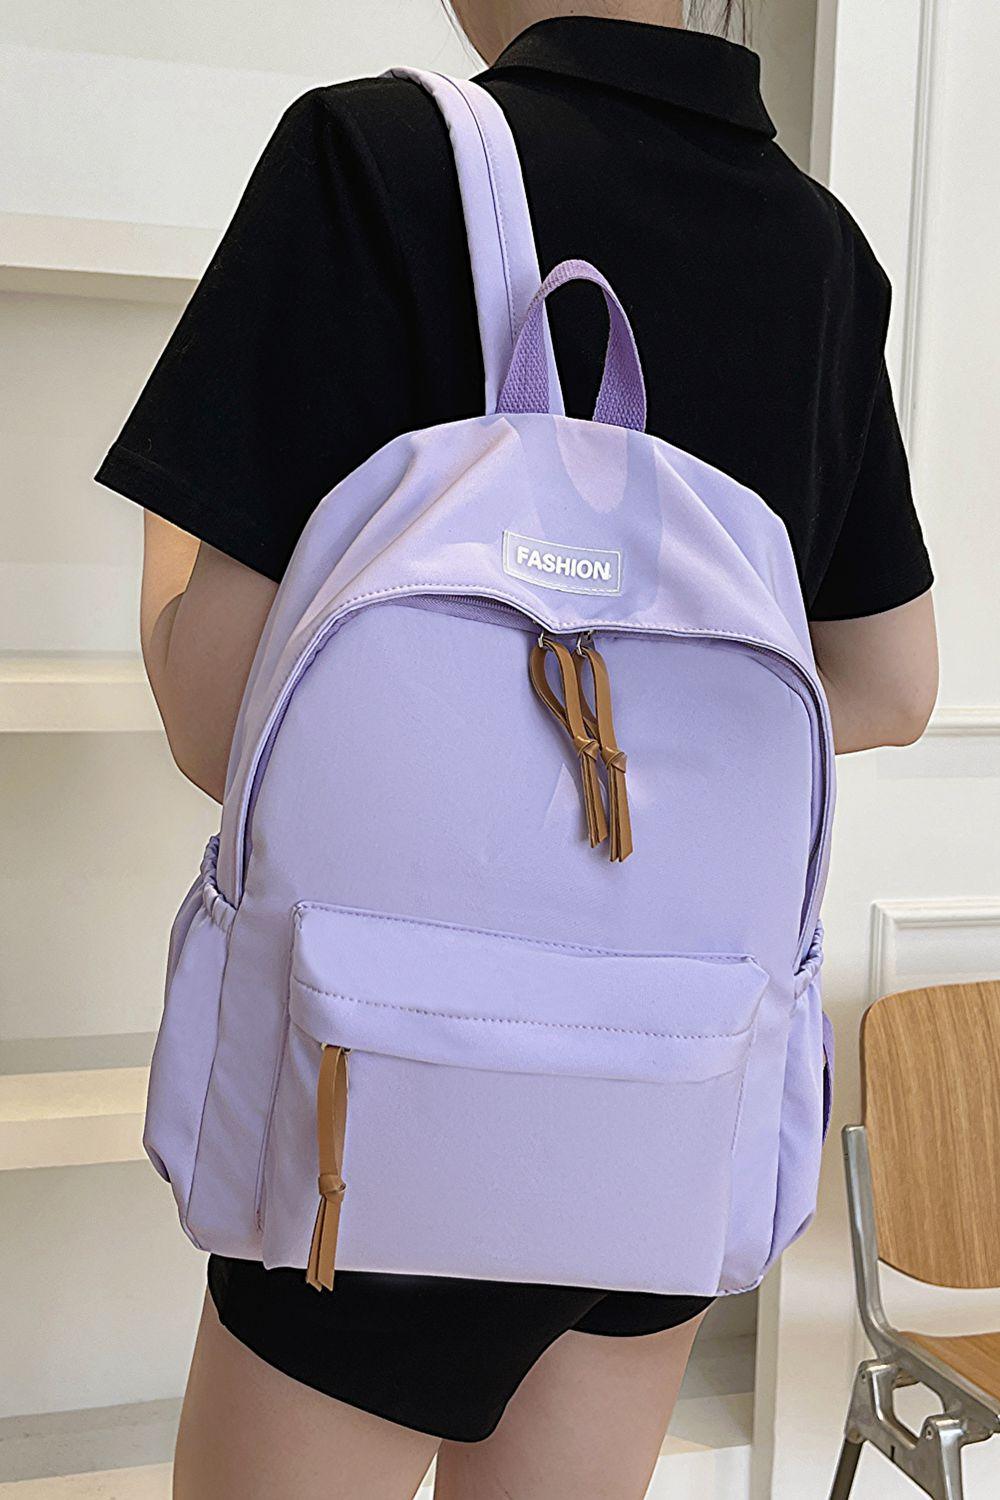 FASHION Polyester Backpack - Crazy Like a Daisy Boutique #